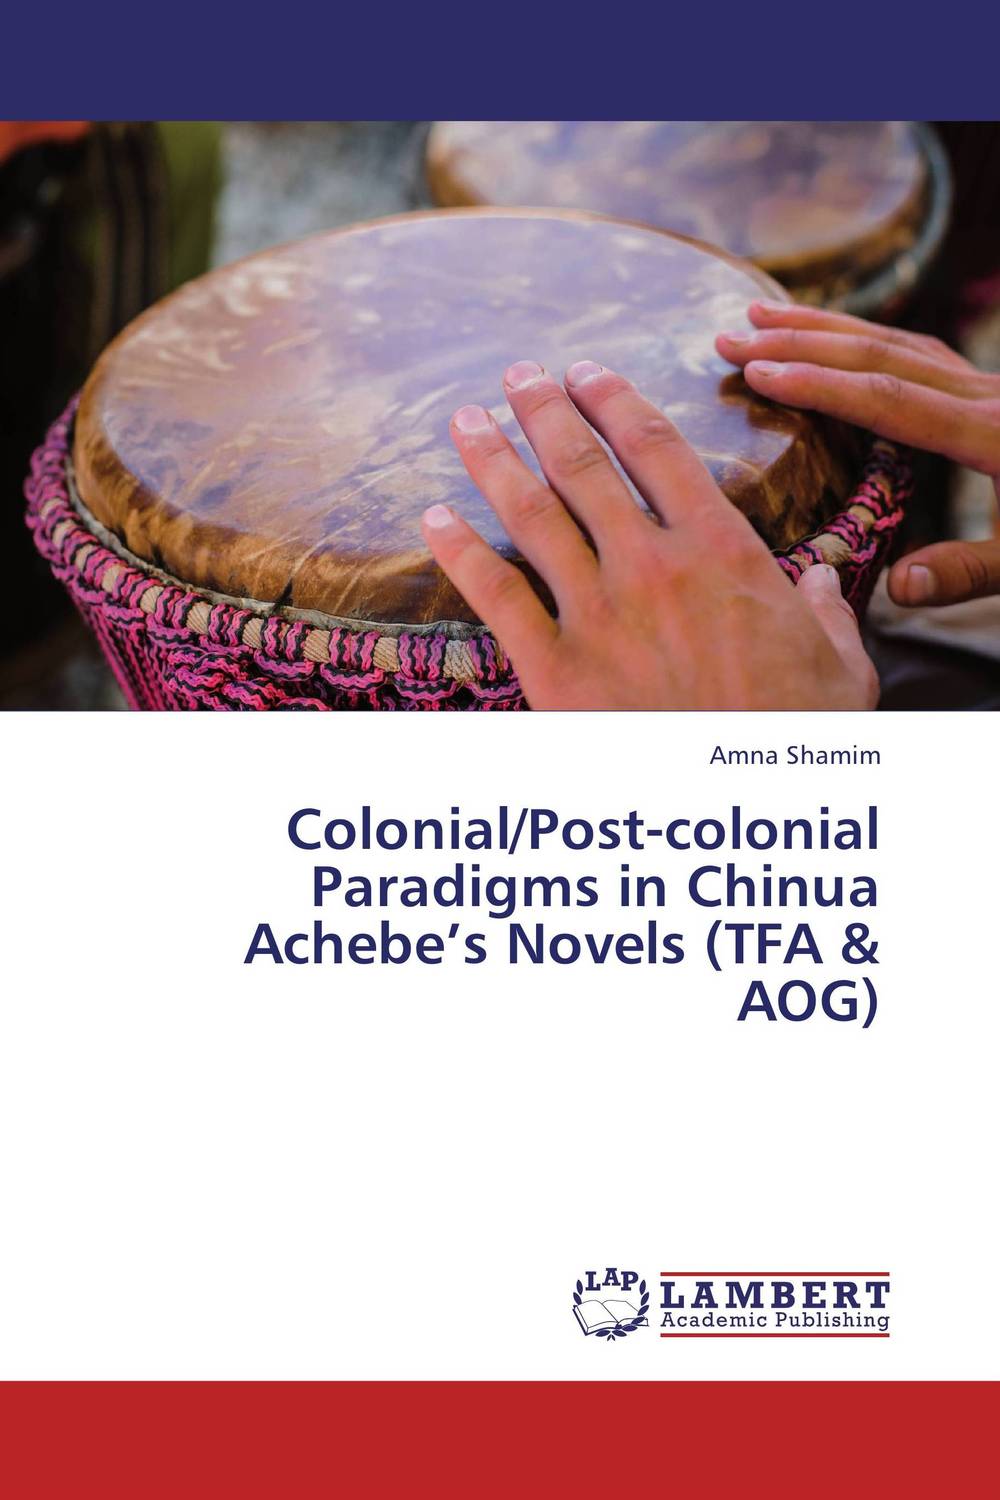 Colonial/Post-colonial Paradigms in Chinua Achebe’s Novels (TFA & AOG)